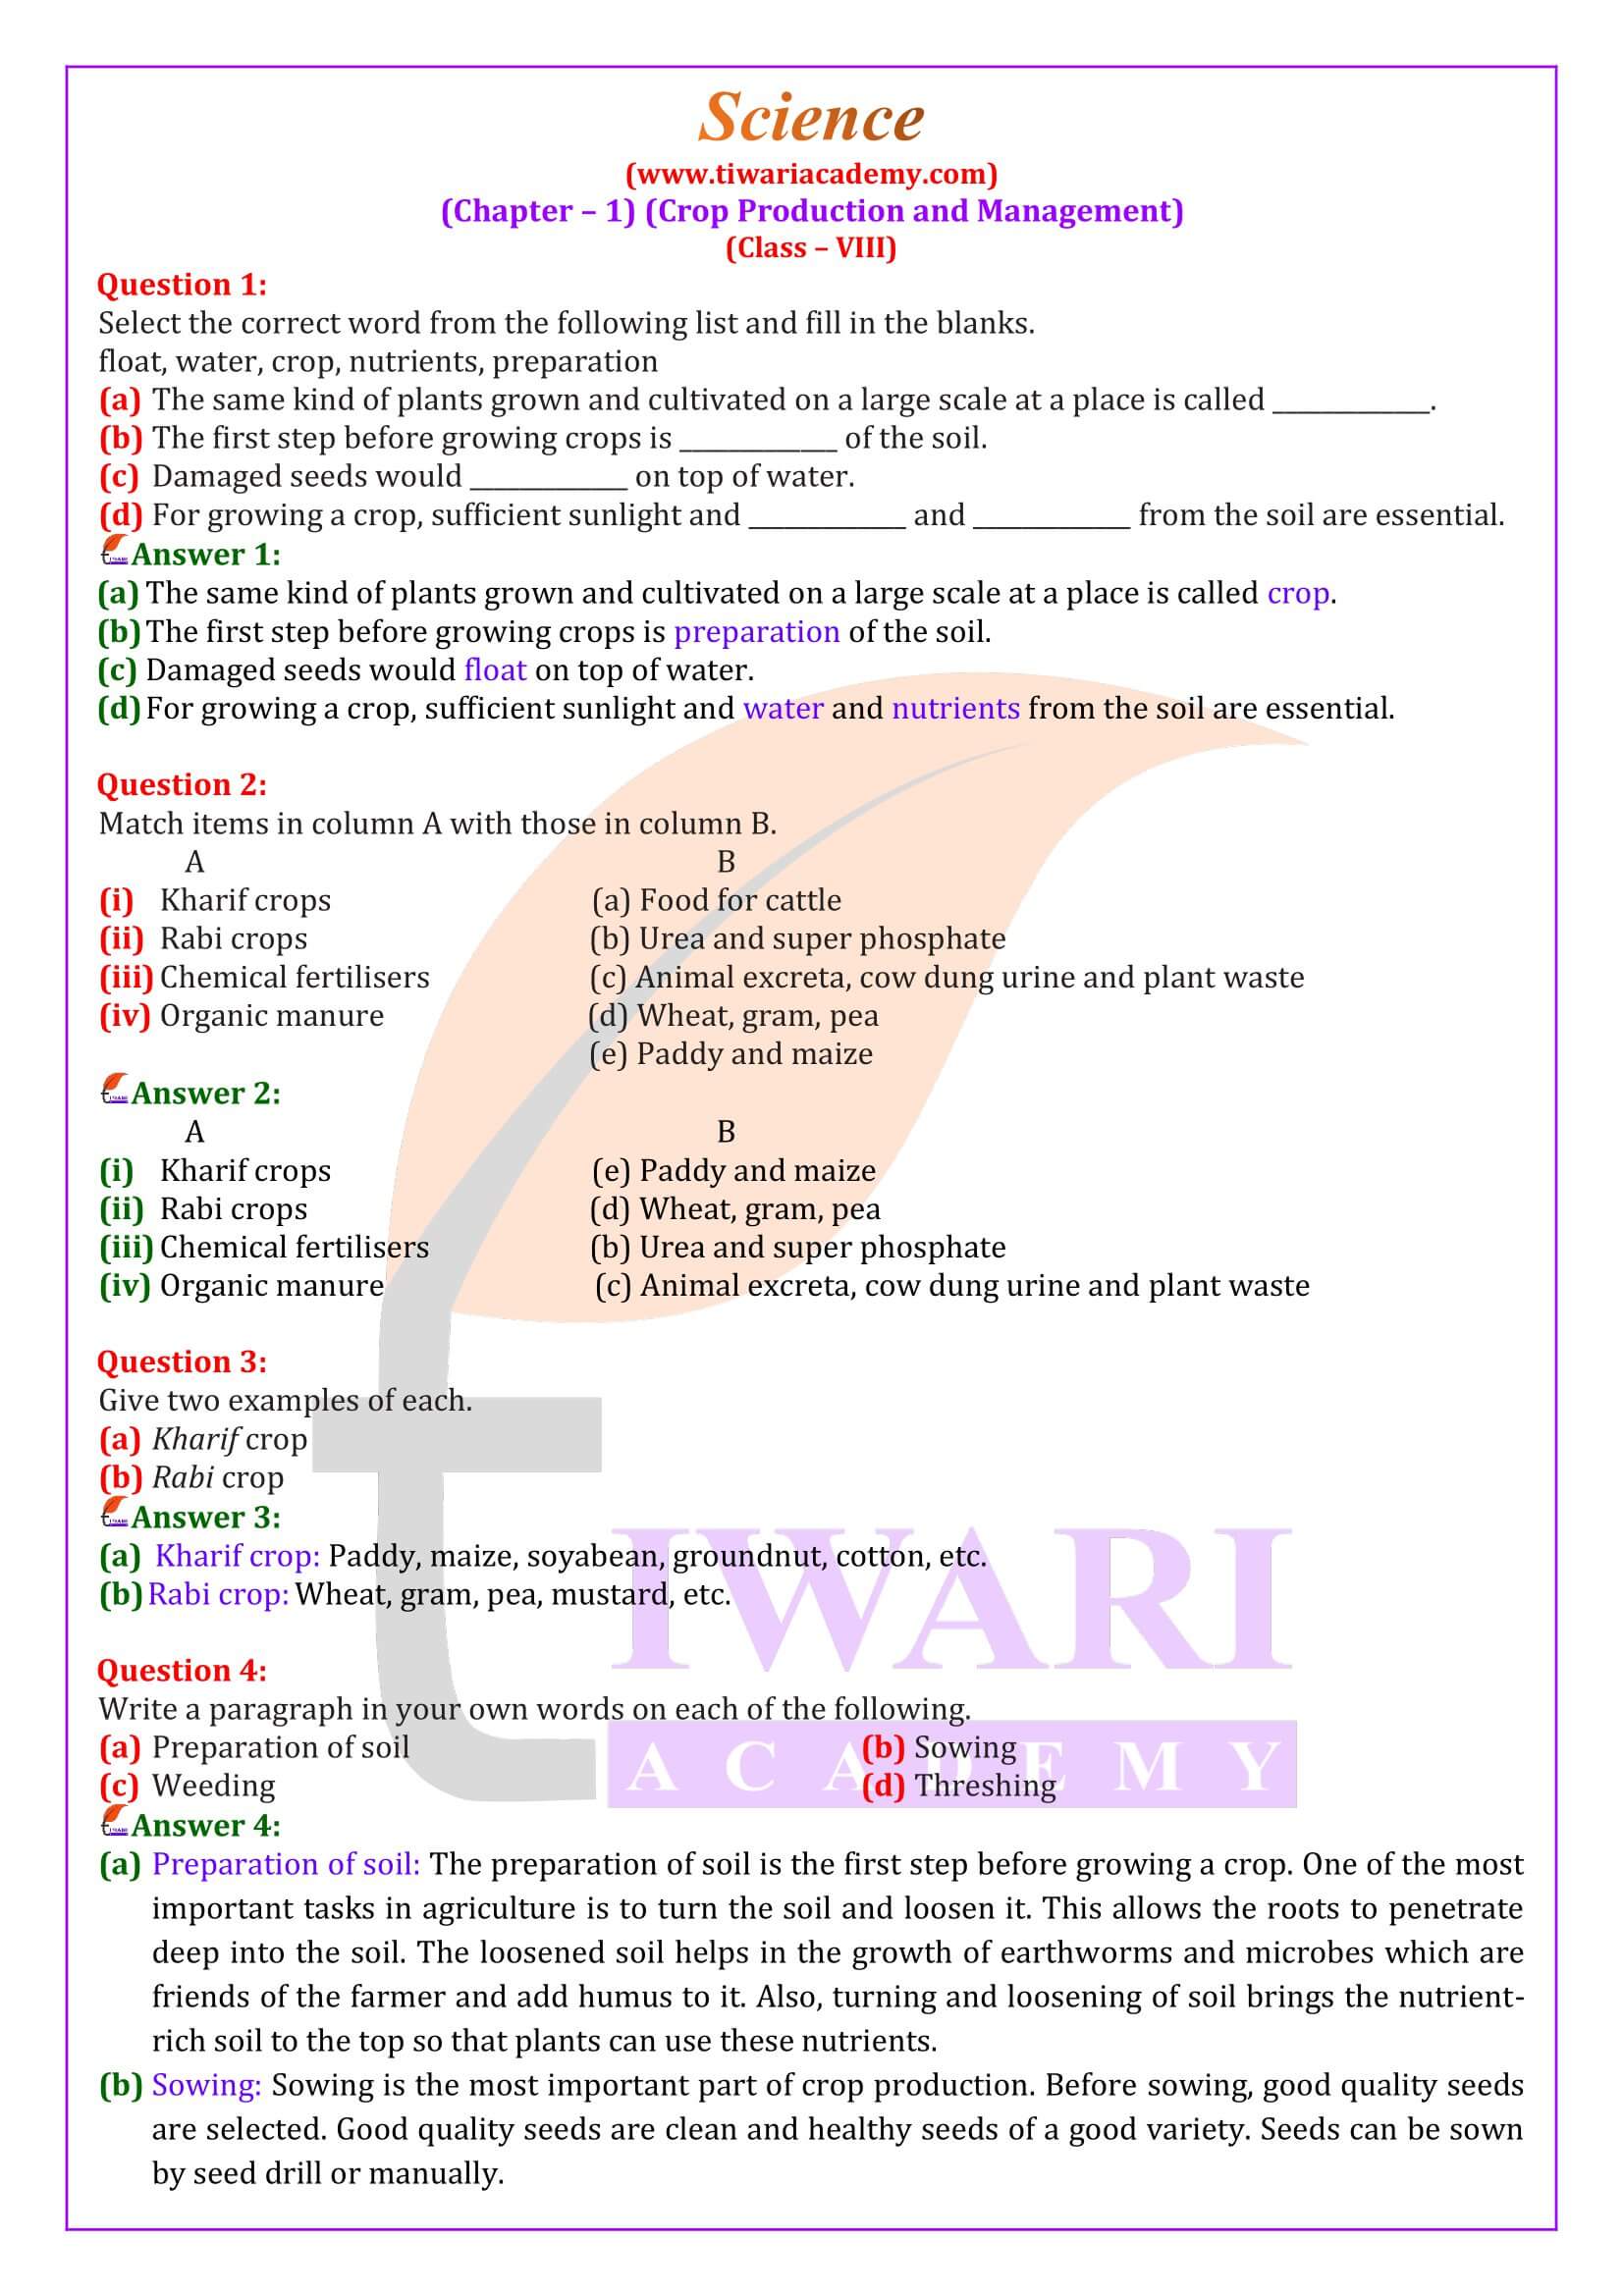 NCERT Solutions for Class 8 Science Chapter 1